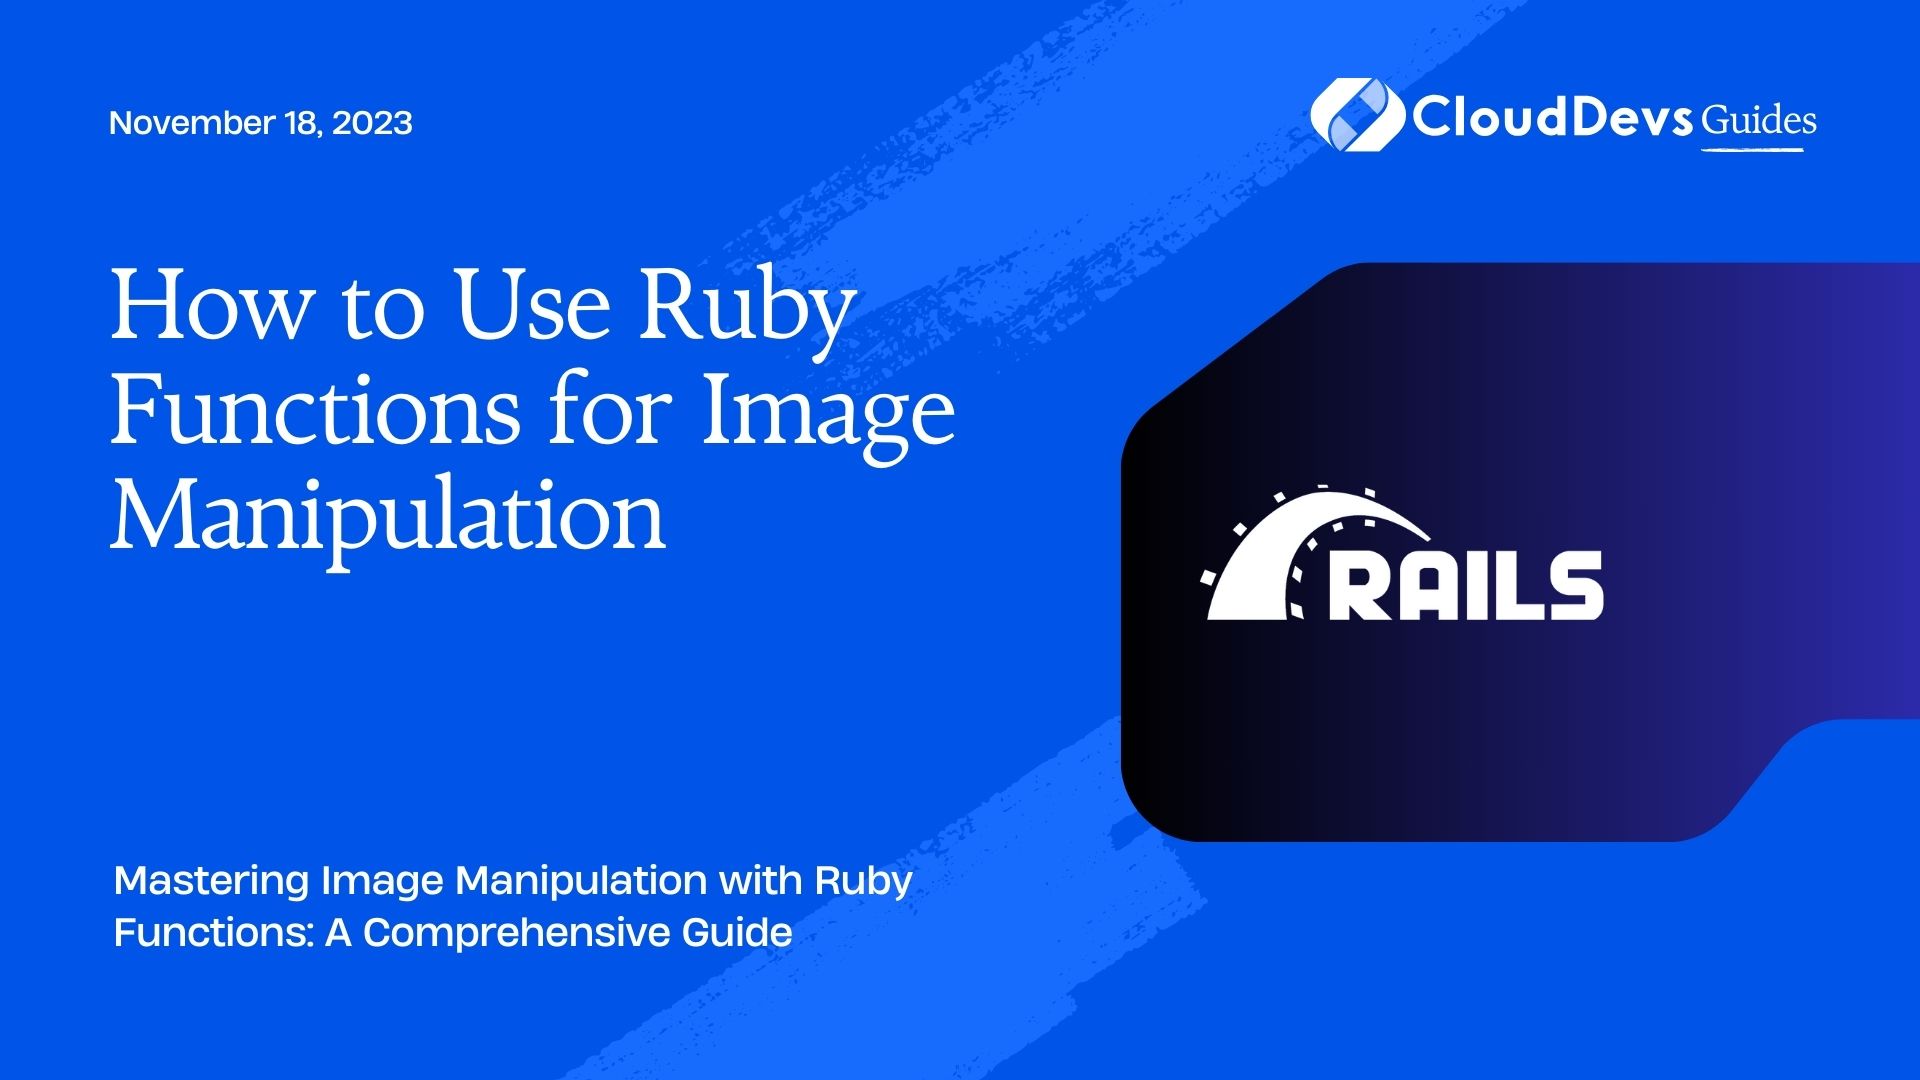 How to Use Ruby Functions for Image Manipulation